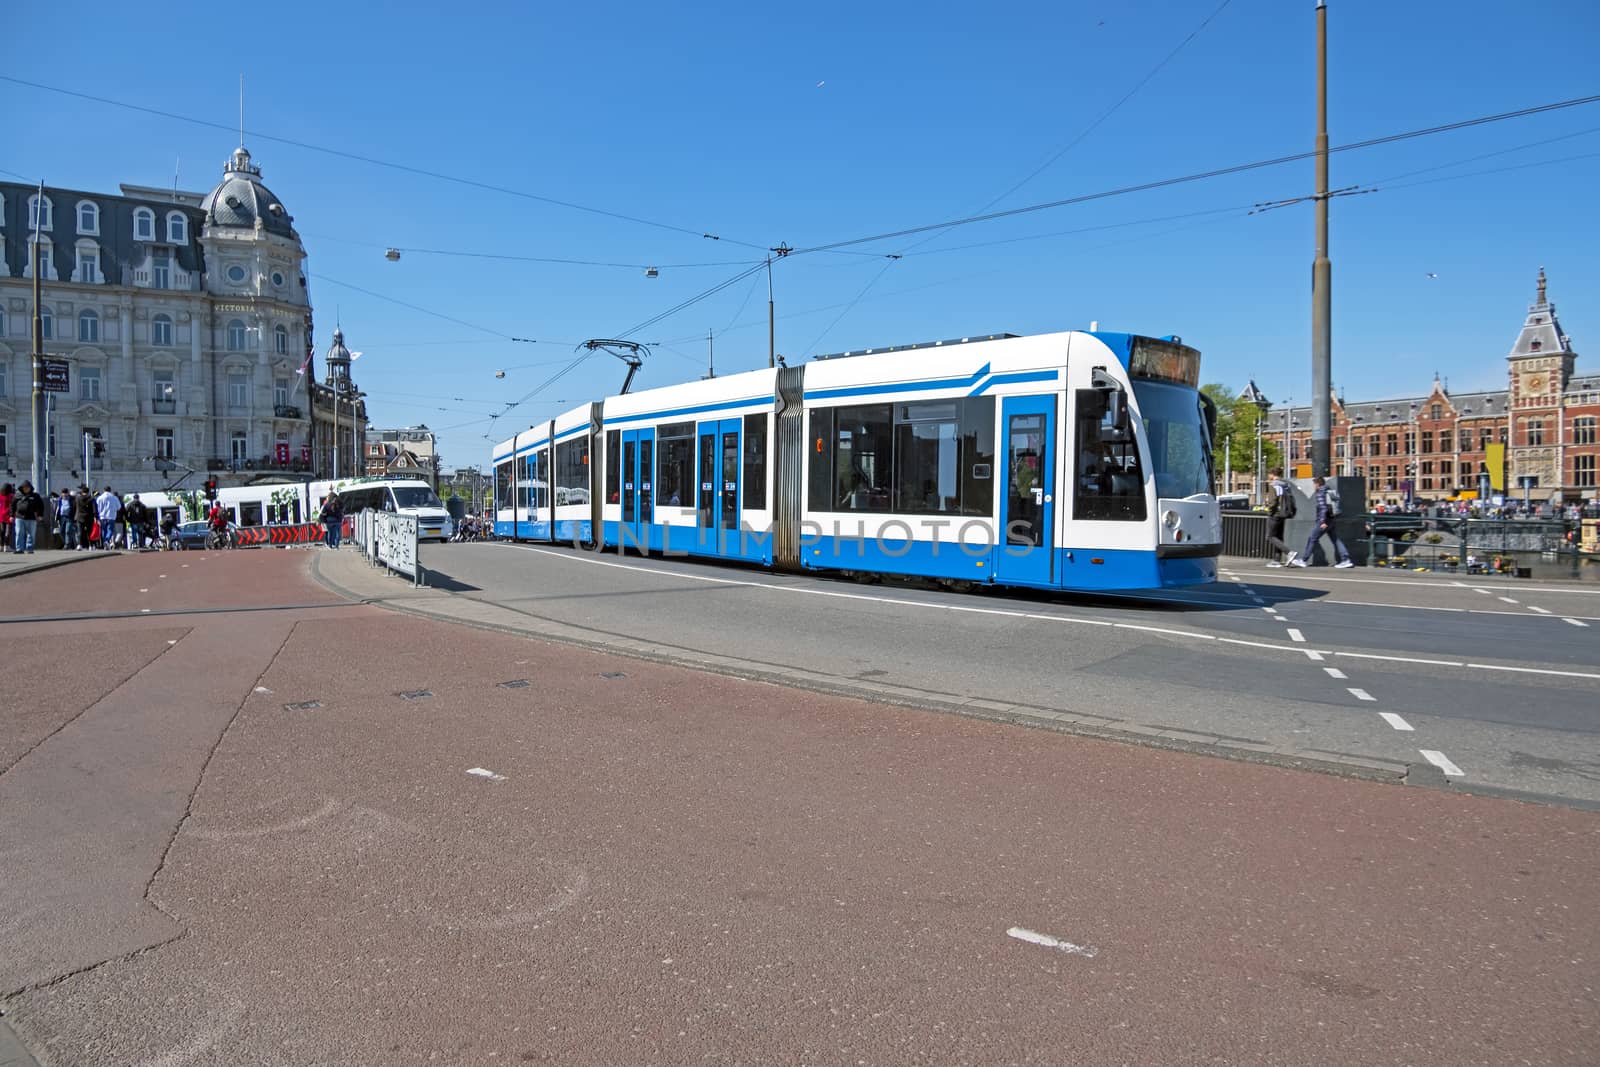 Tram driving in the city center from Amsterdam in the Netherlands with the central station